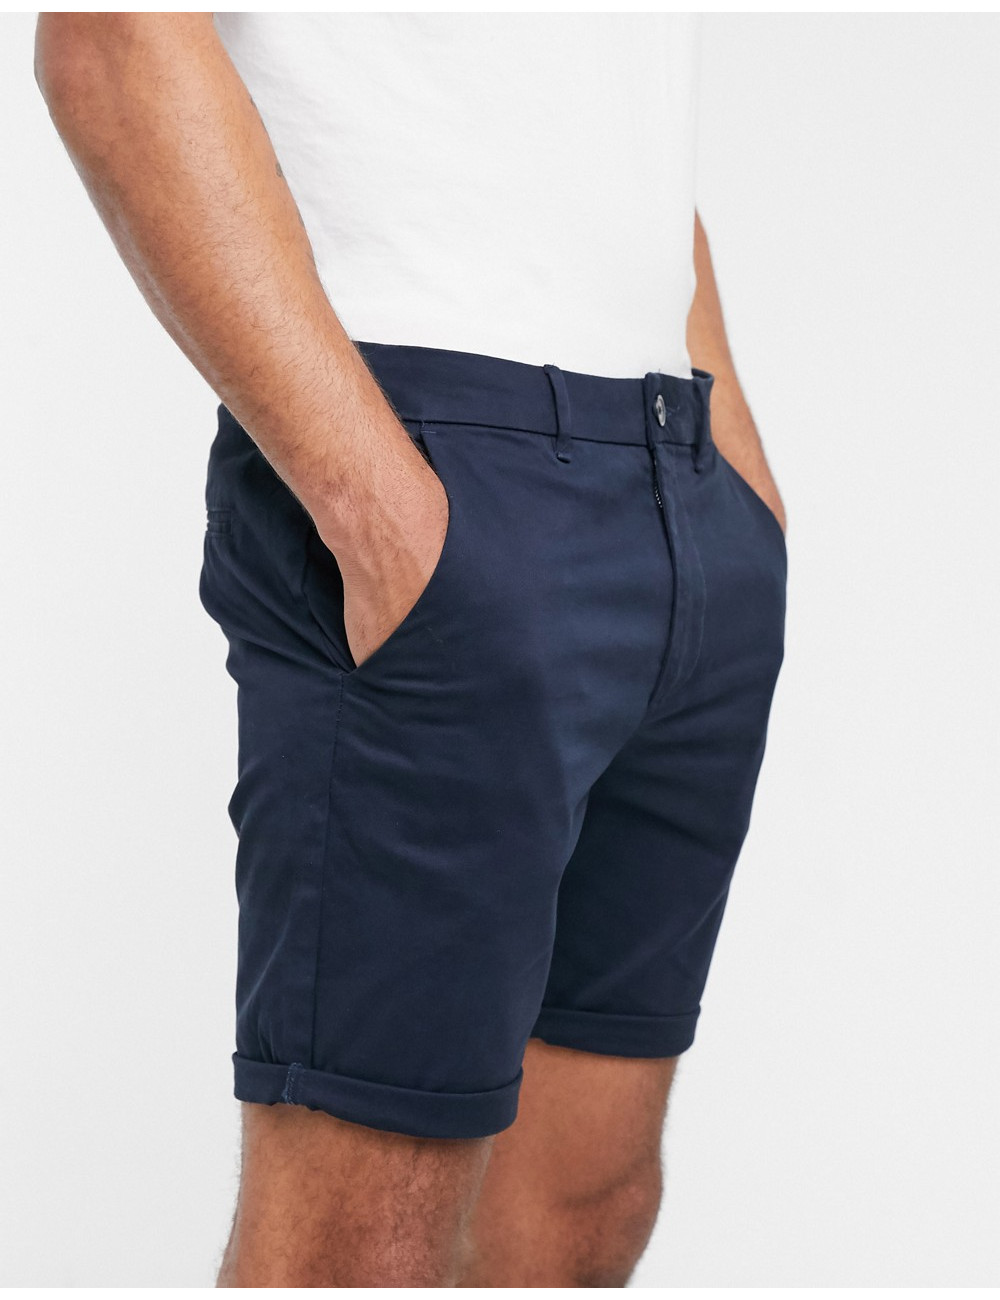 River Island shorts in navy